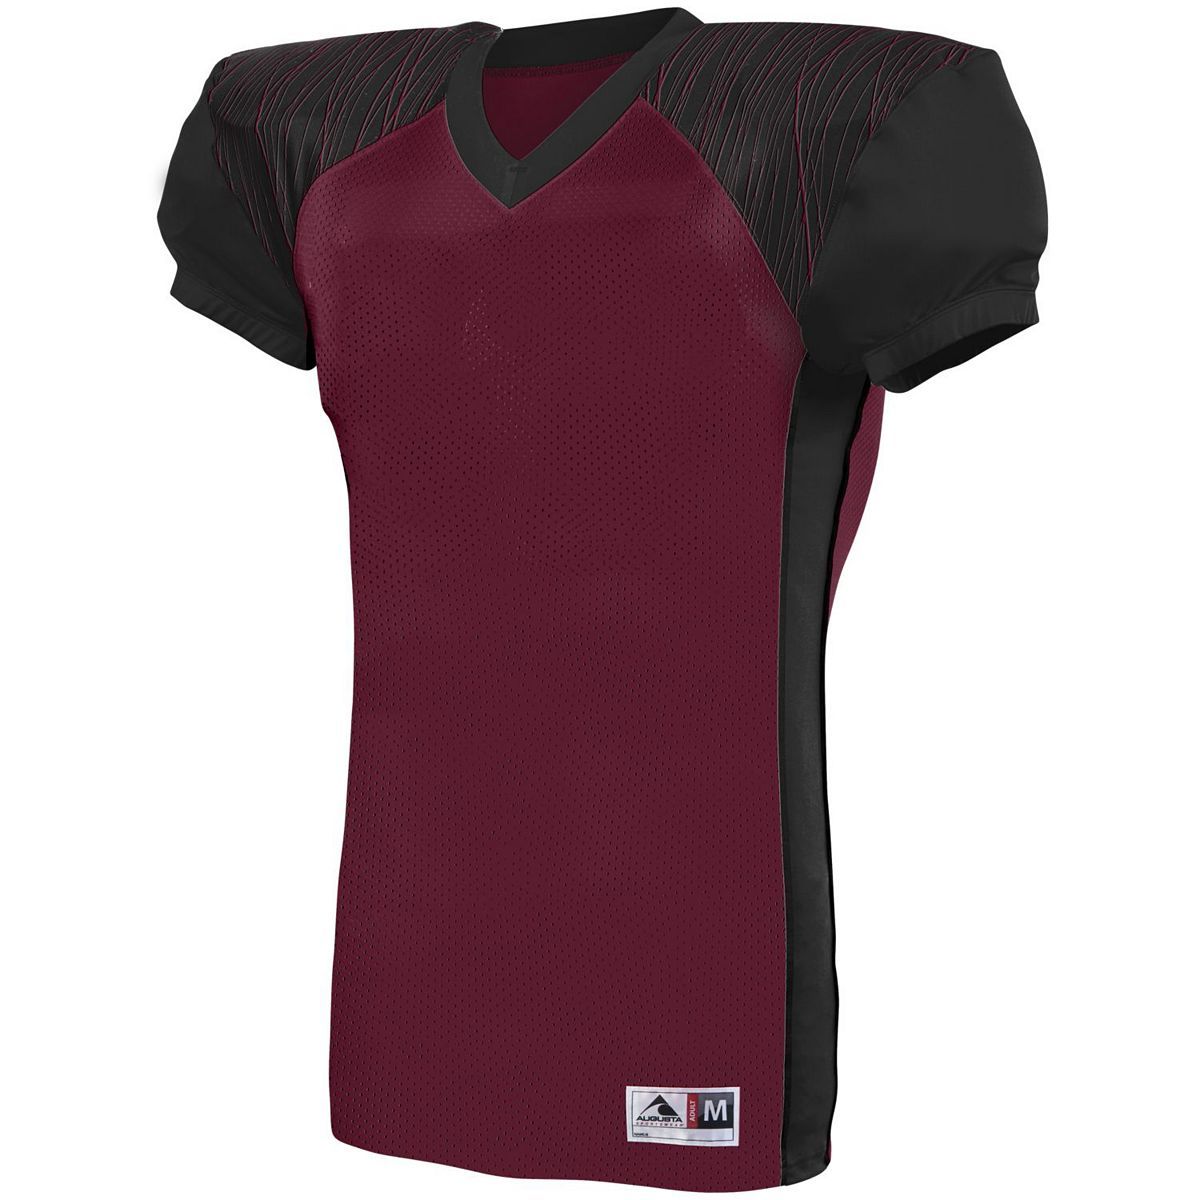 Augusta Sportswear Youth Zone Play Jersey in Maroon/Black/Maroon Print  -Part of the Youth, Youth-Jersey, Augusta-Products, Football, Shirts, All-Sports, All-Sports-1 product lines at KanaleyCreations.com